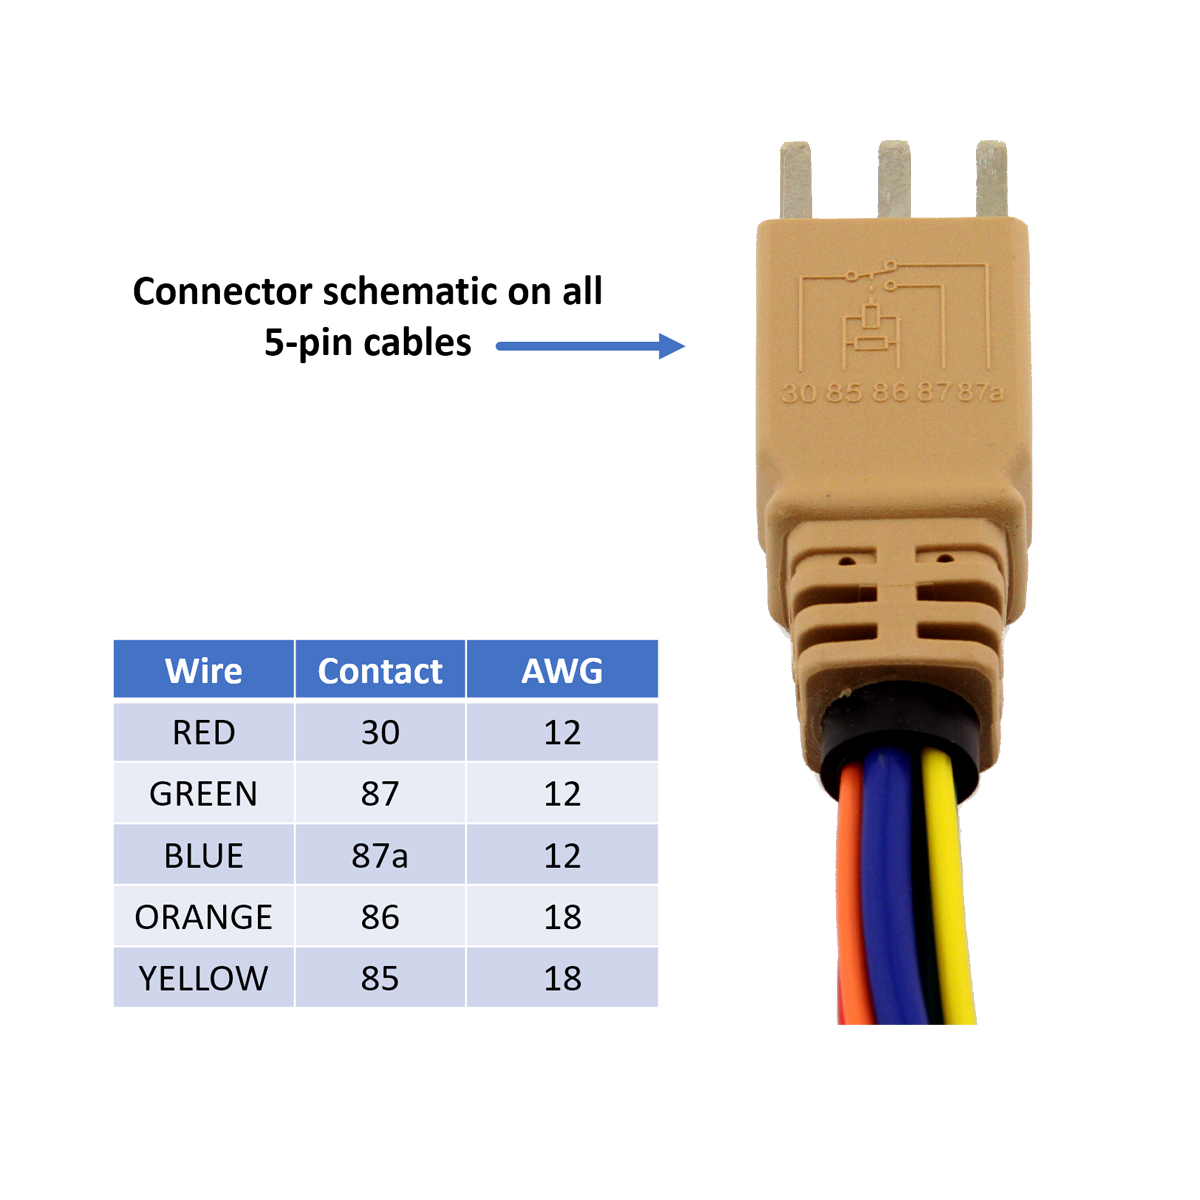 ISO 280 relay wire and color code